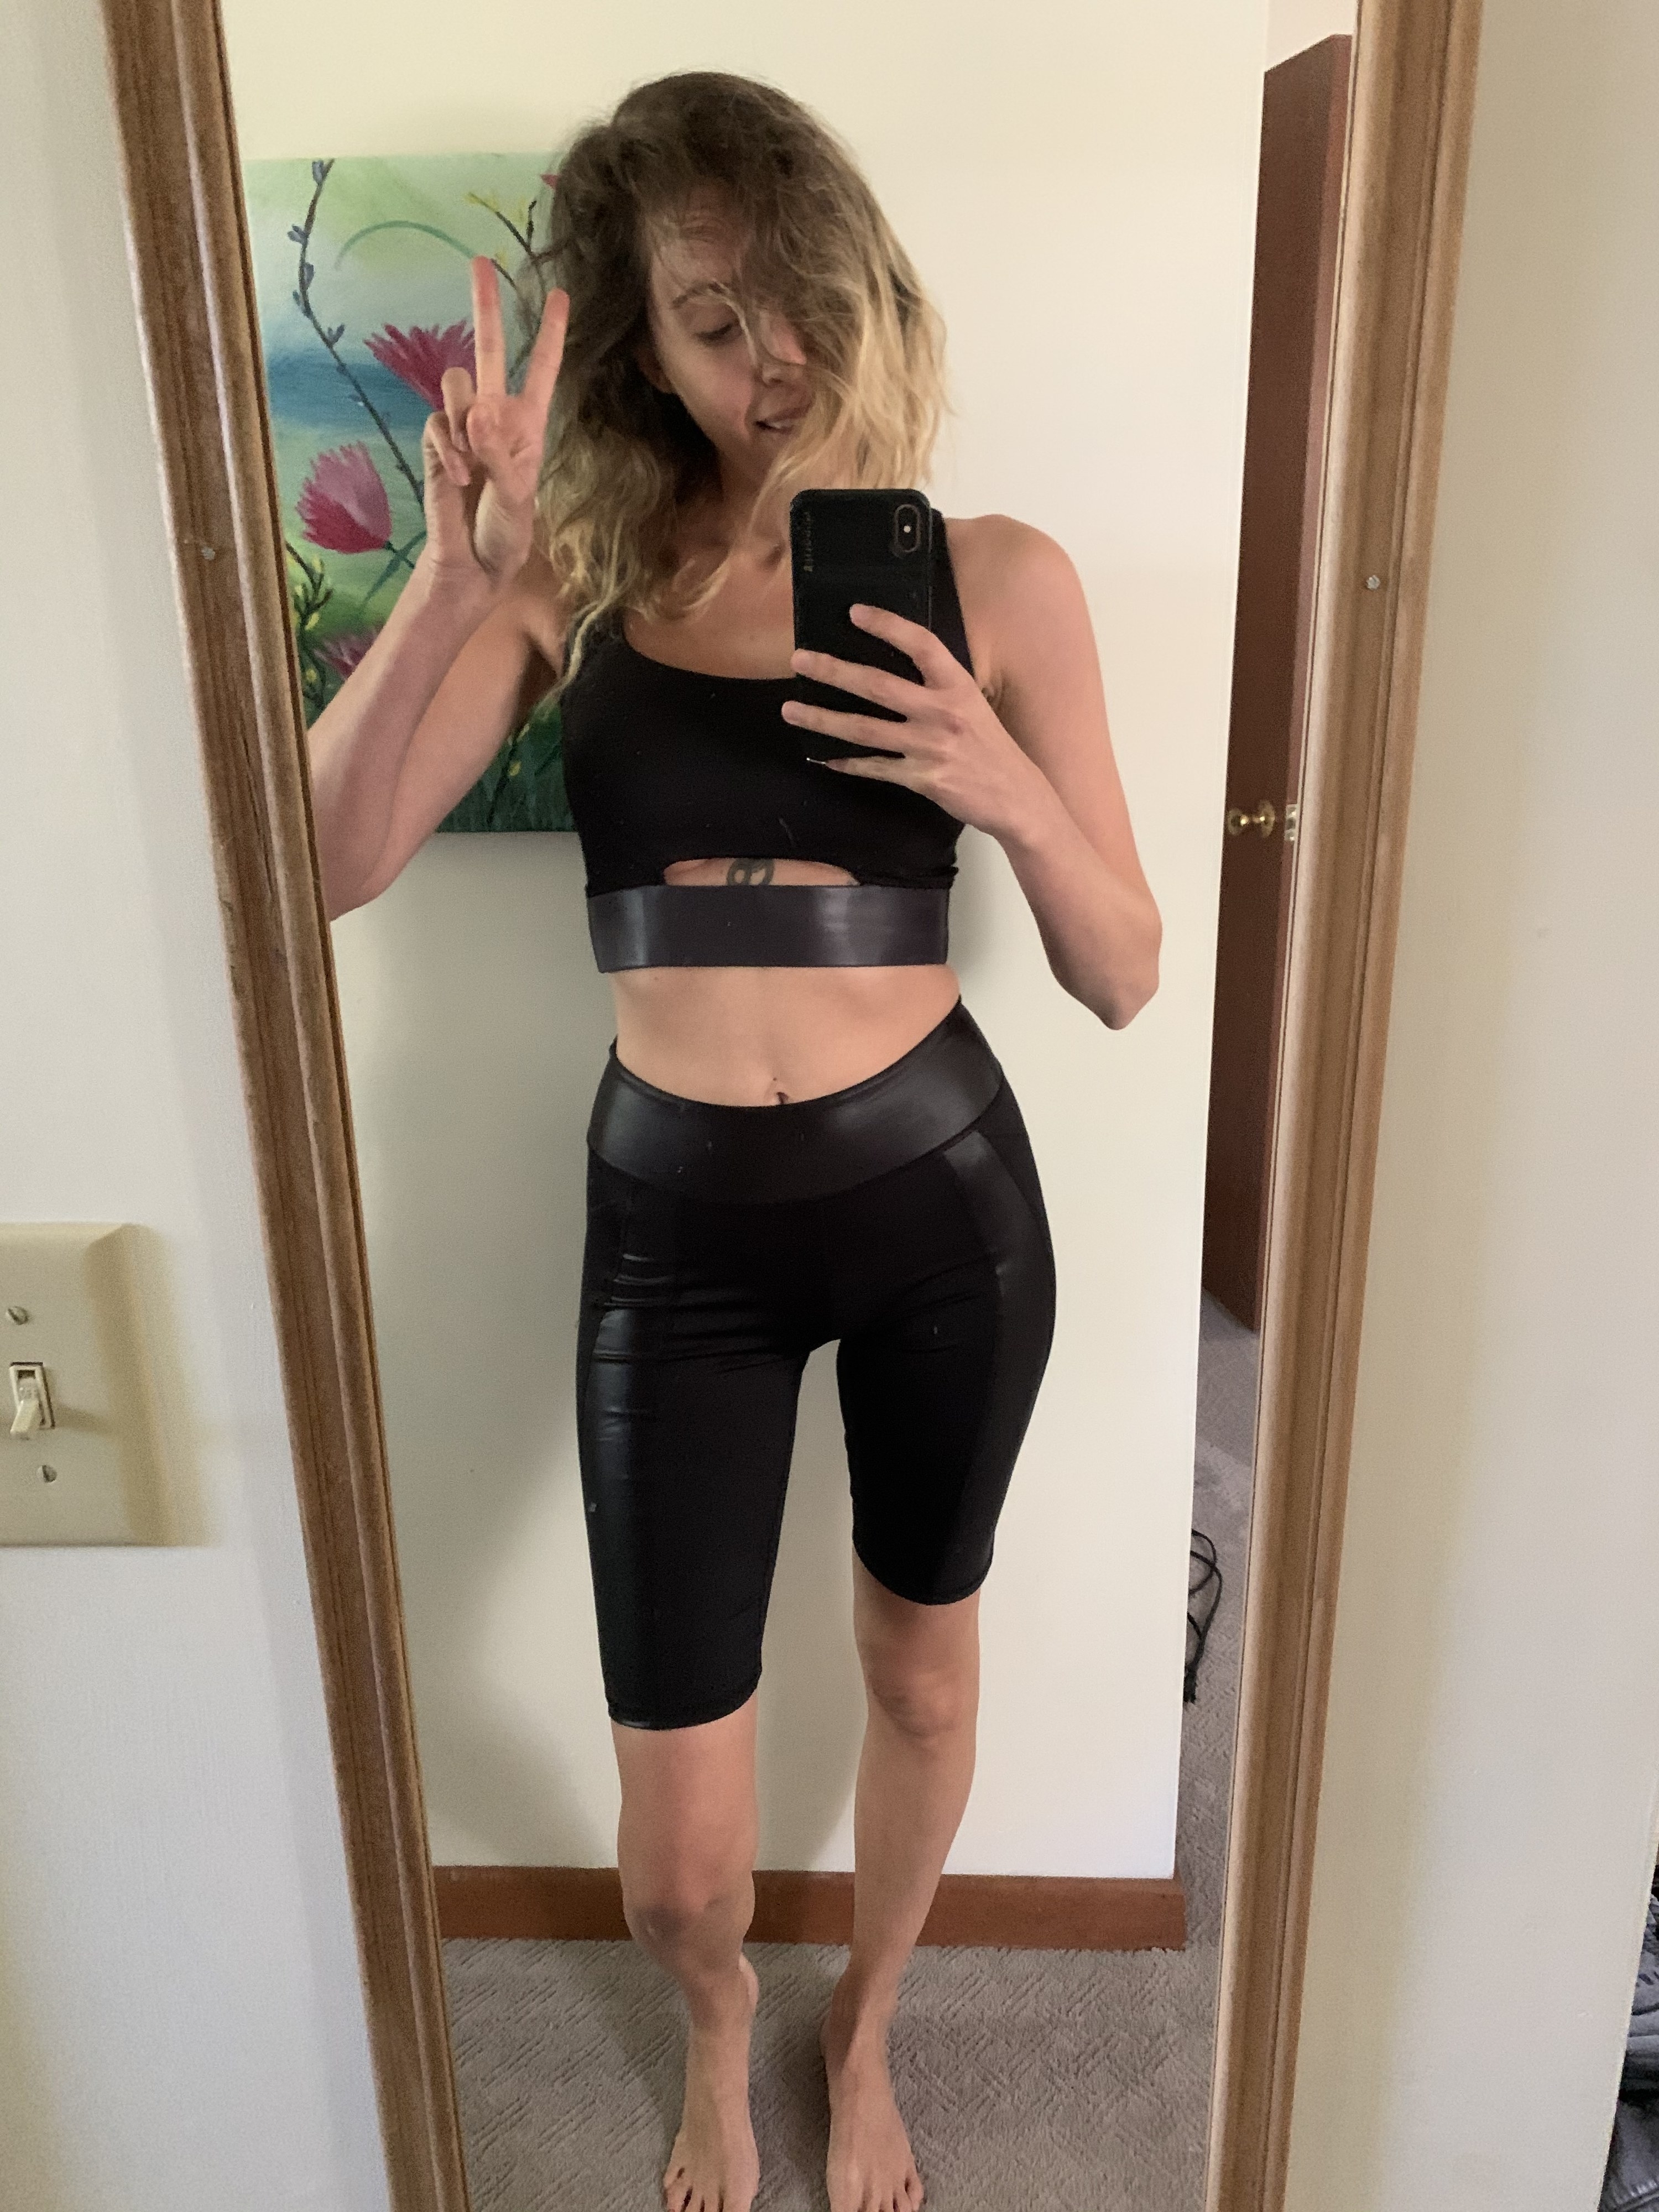 Acabada's $125 CBD-Infused Sports Bra: Who would buy it?